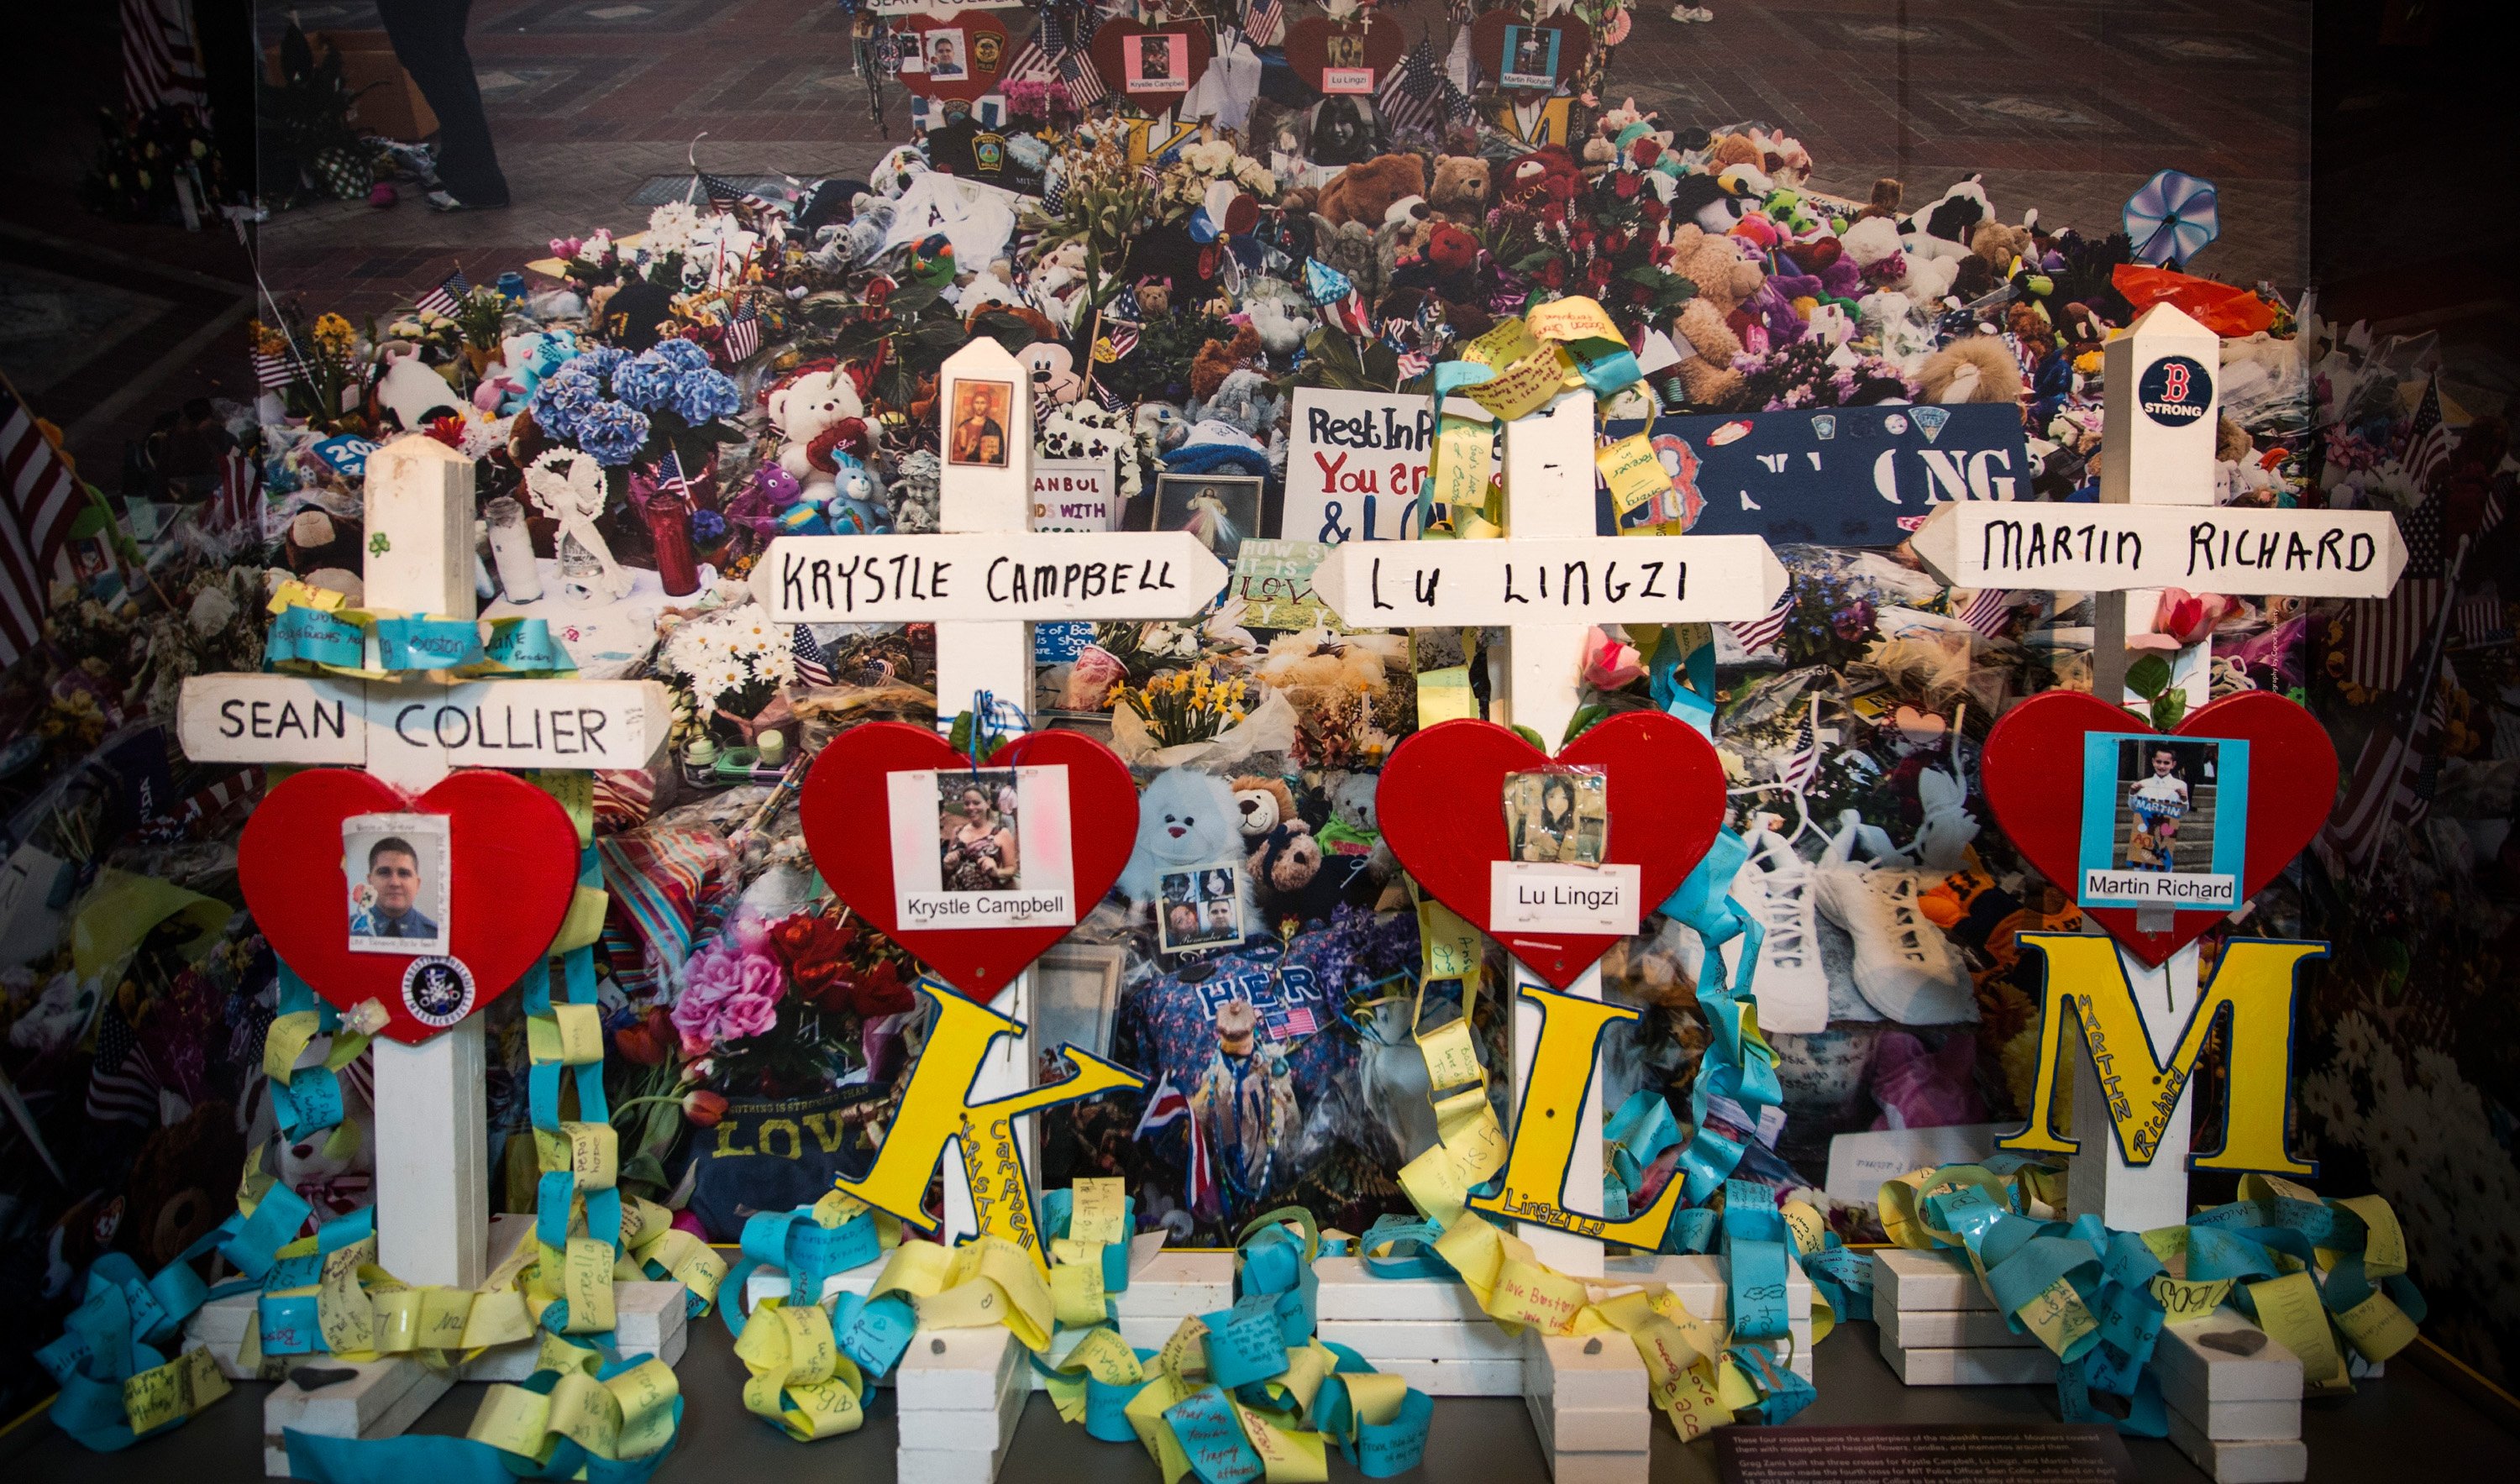 Crosses bearing the names of victims of the 2013 Boston Marathon bombing are displayed in a memorial at the Boston Public Library on April 14, 2014 in Boston. (Andrew Burton—Getty Images)